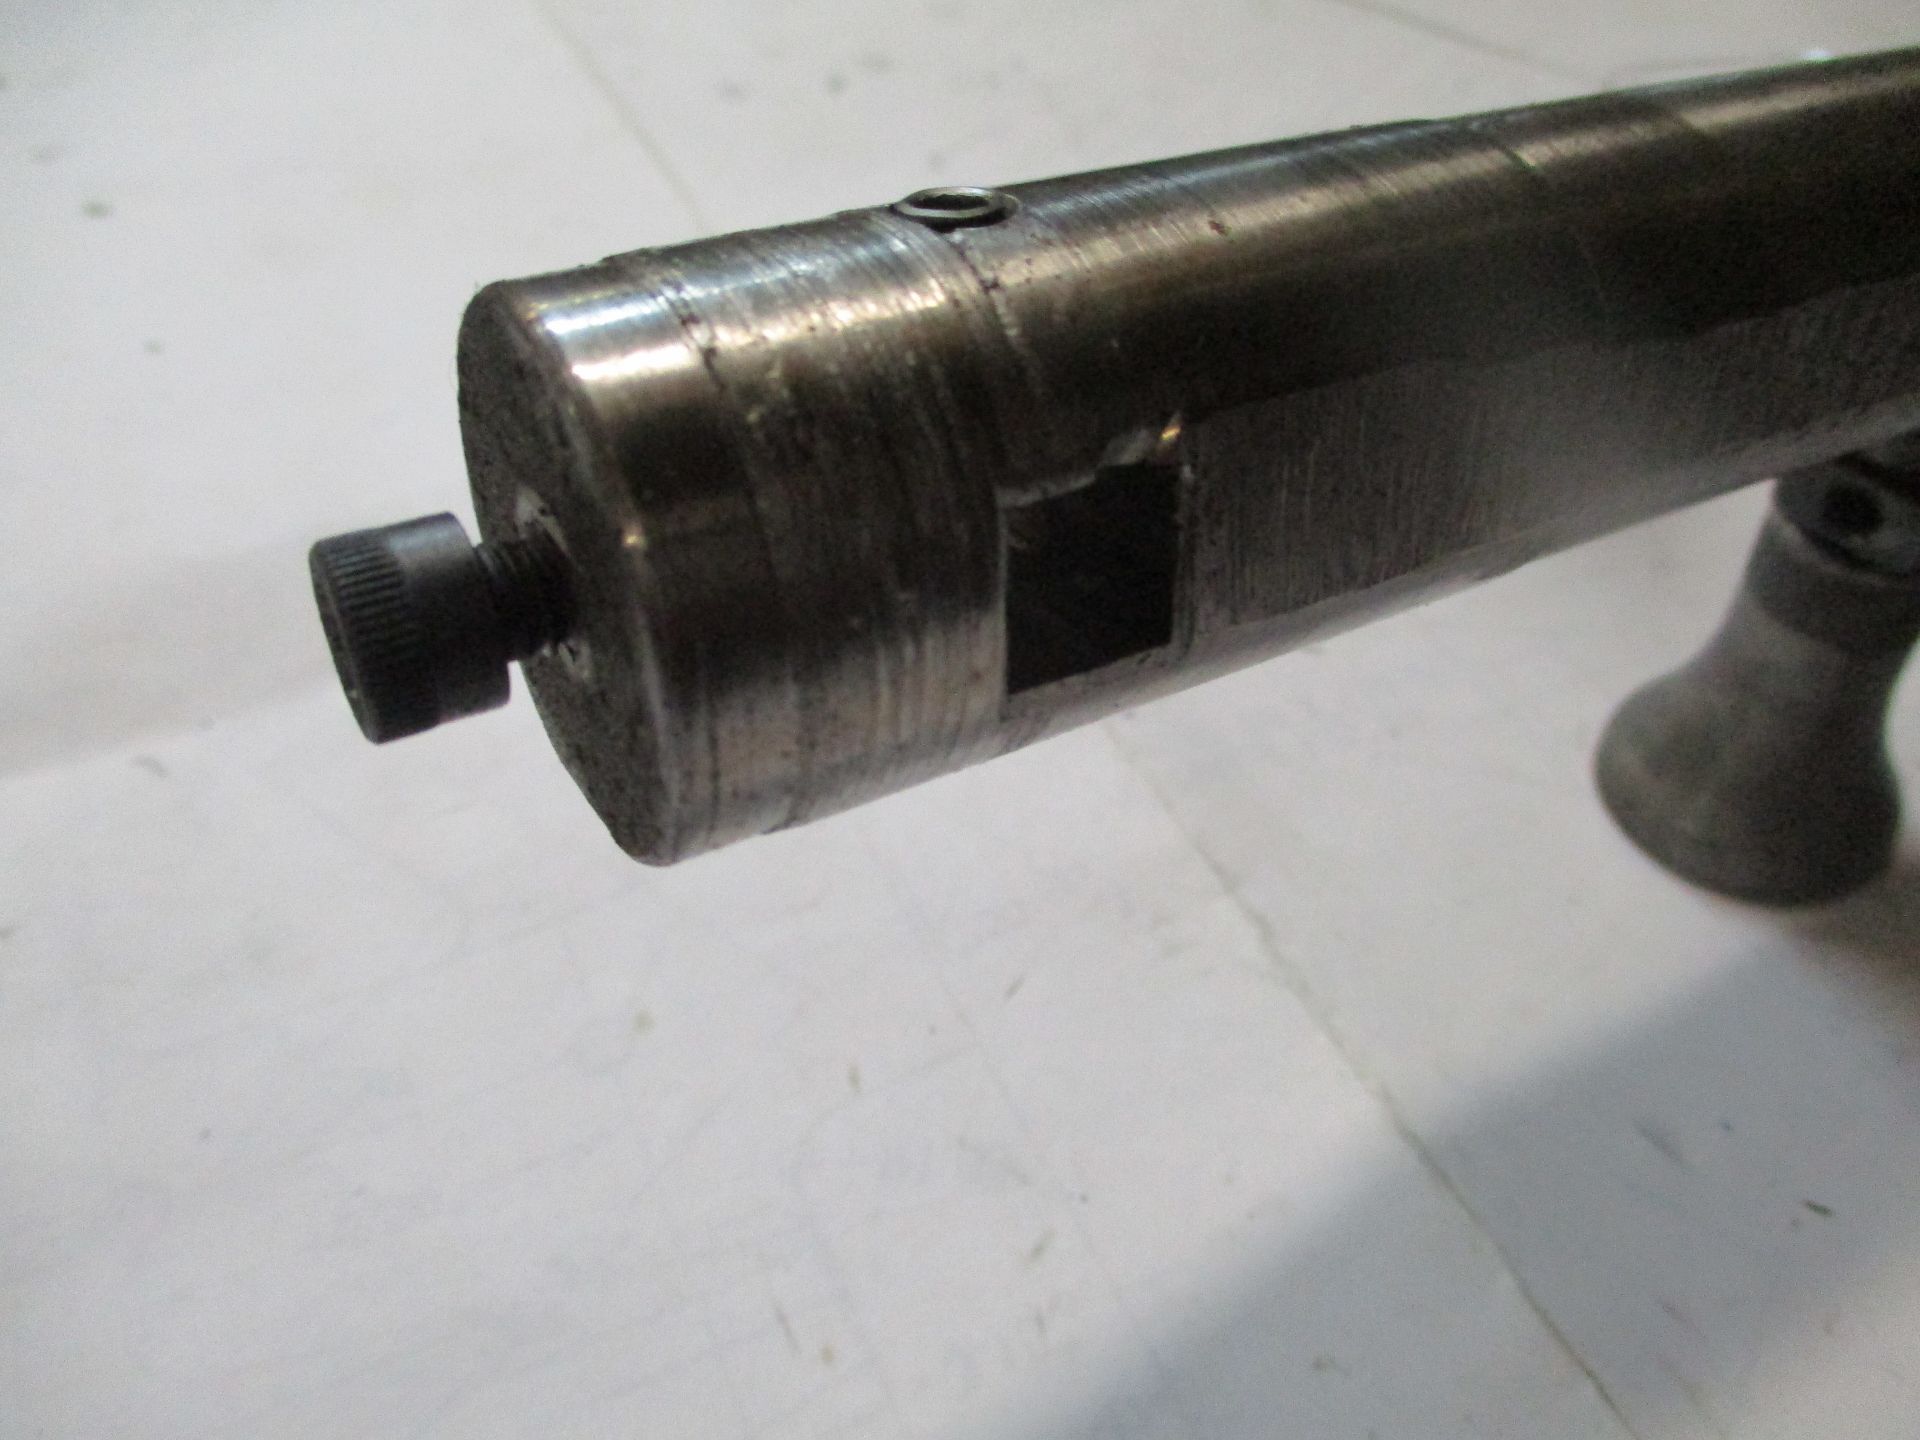 Taper 50 Solid Holder with Boring Bar - Image 2 of 2